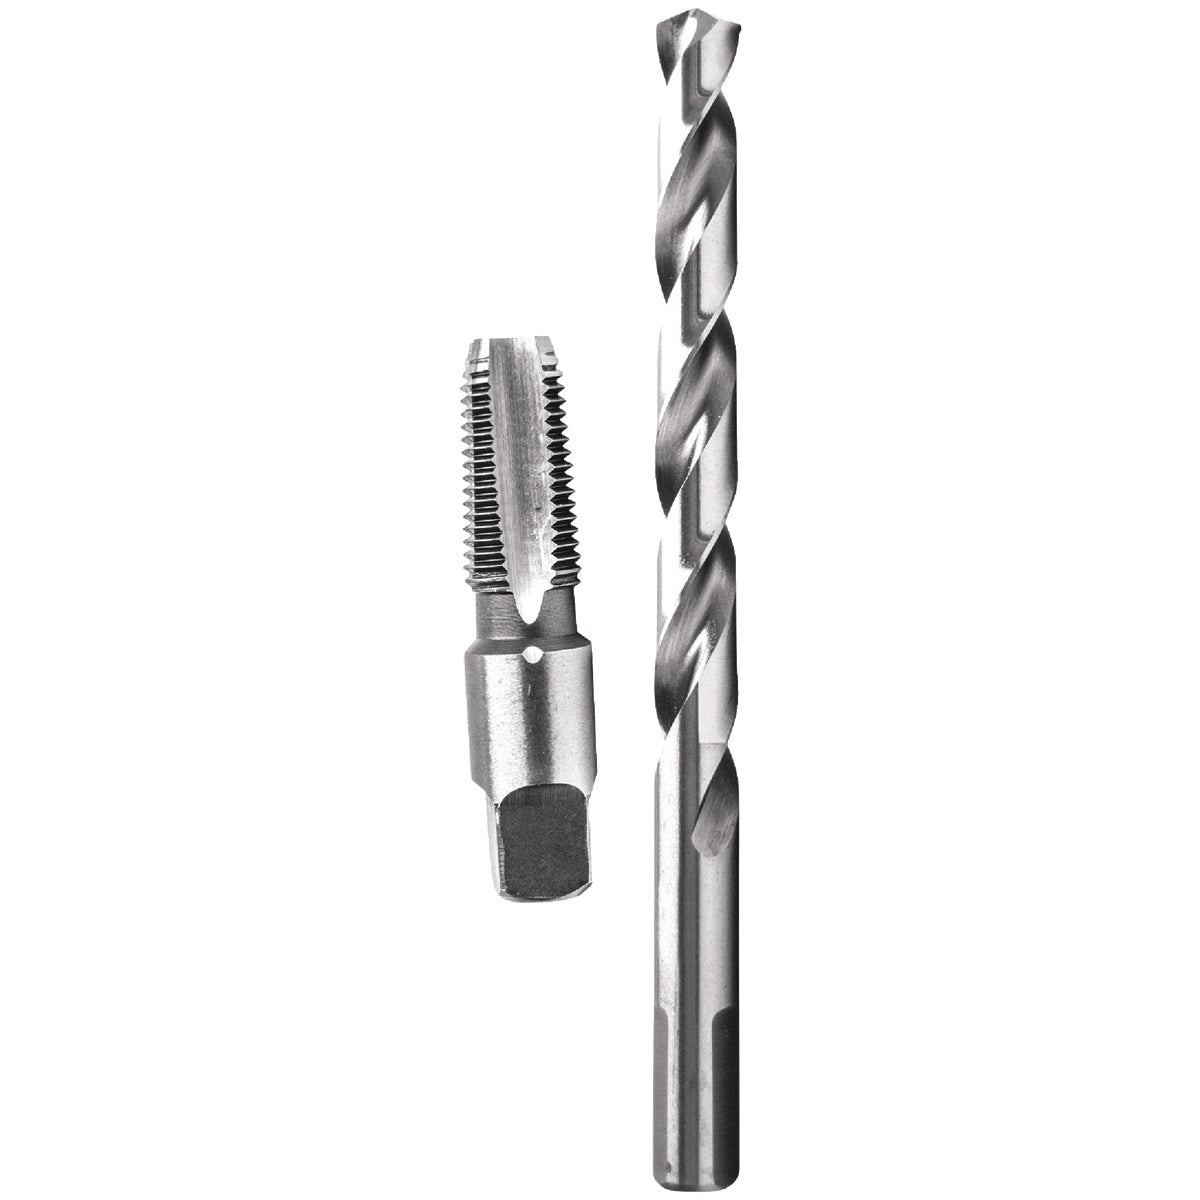 Century Drill & Tool 1/8-27 NPT Tap & 21/64 In. Drill Bit Combo Pack